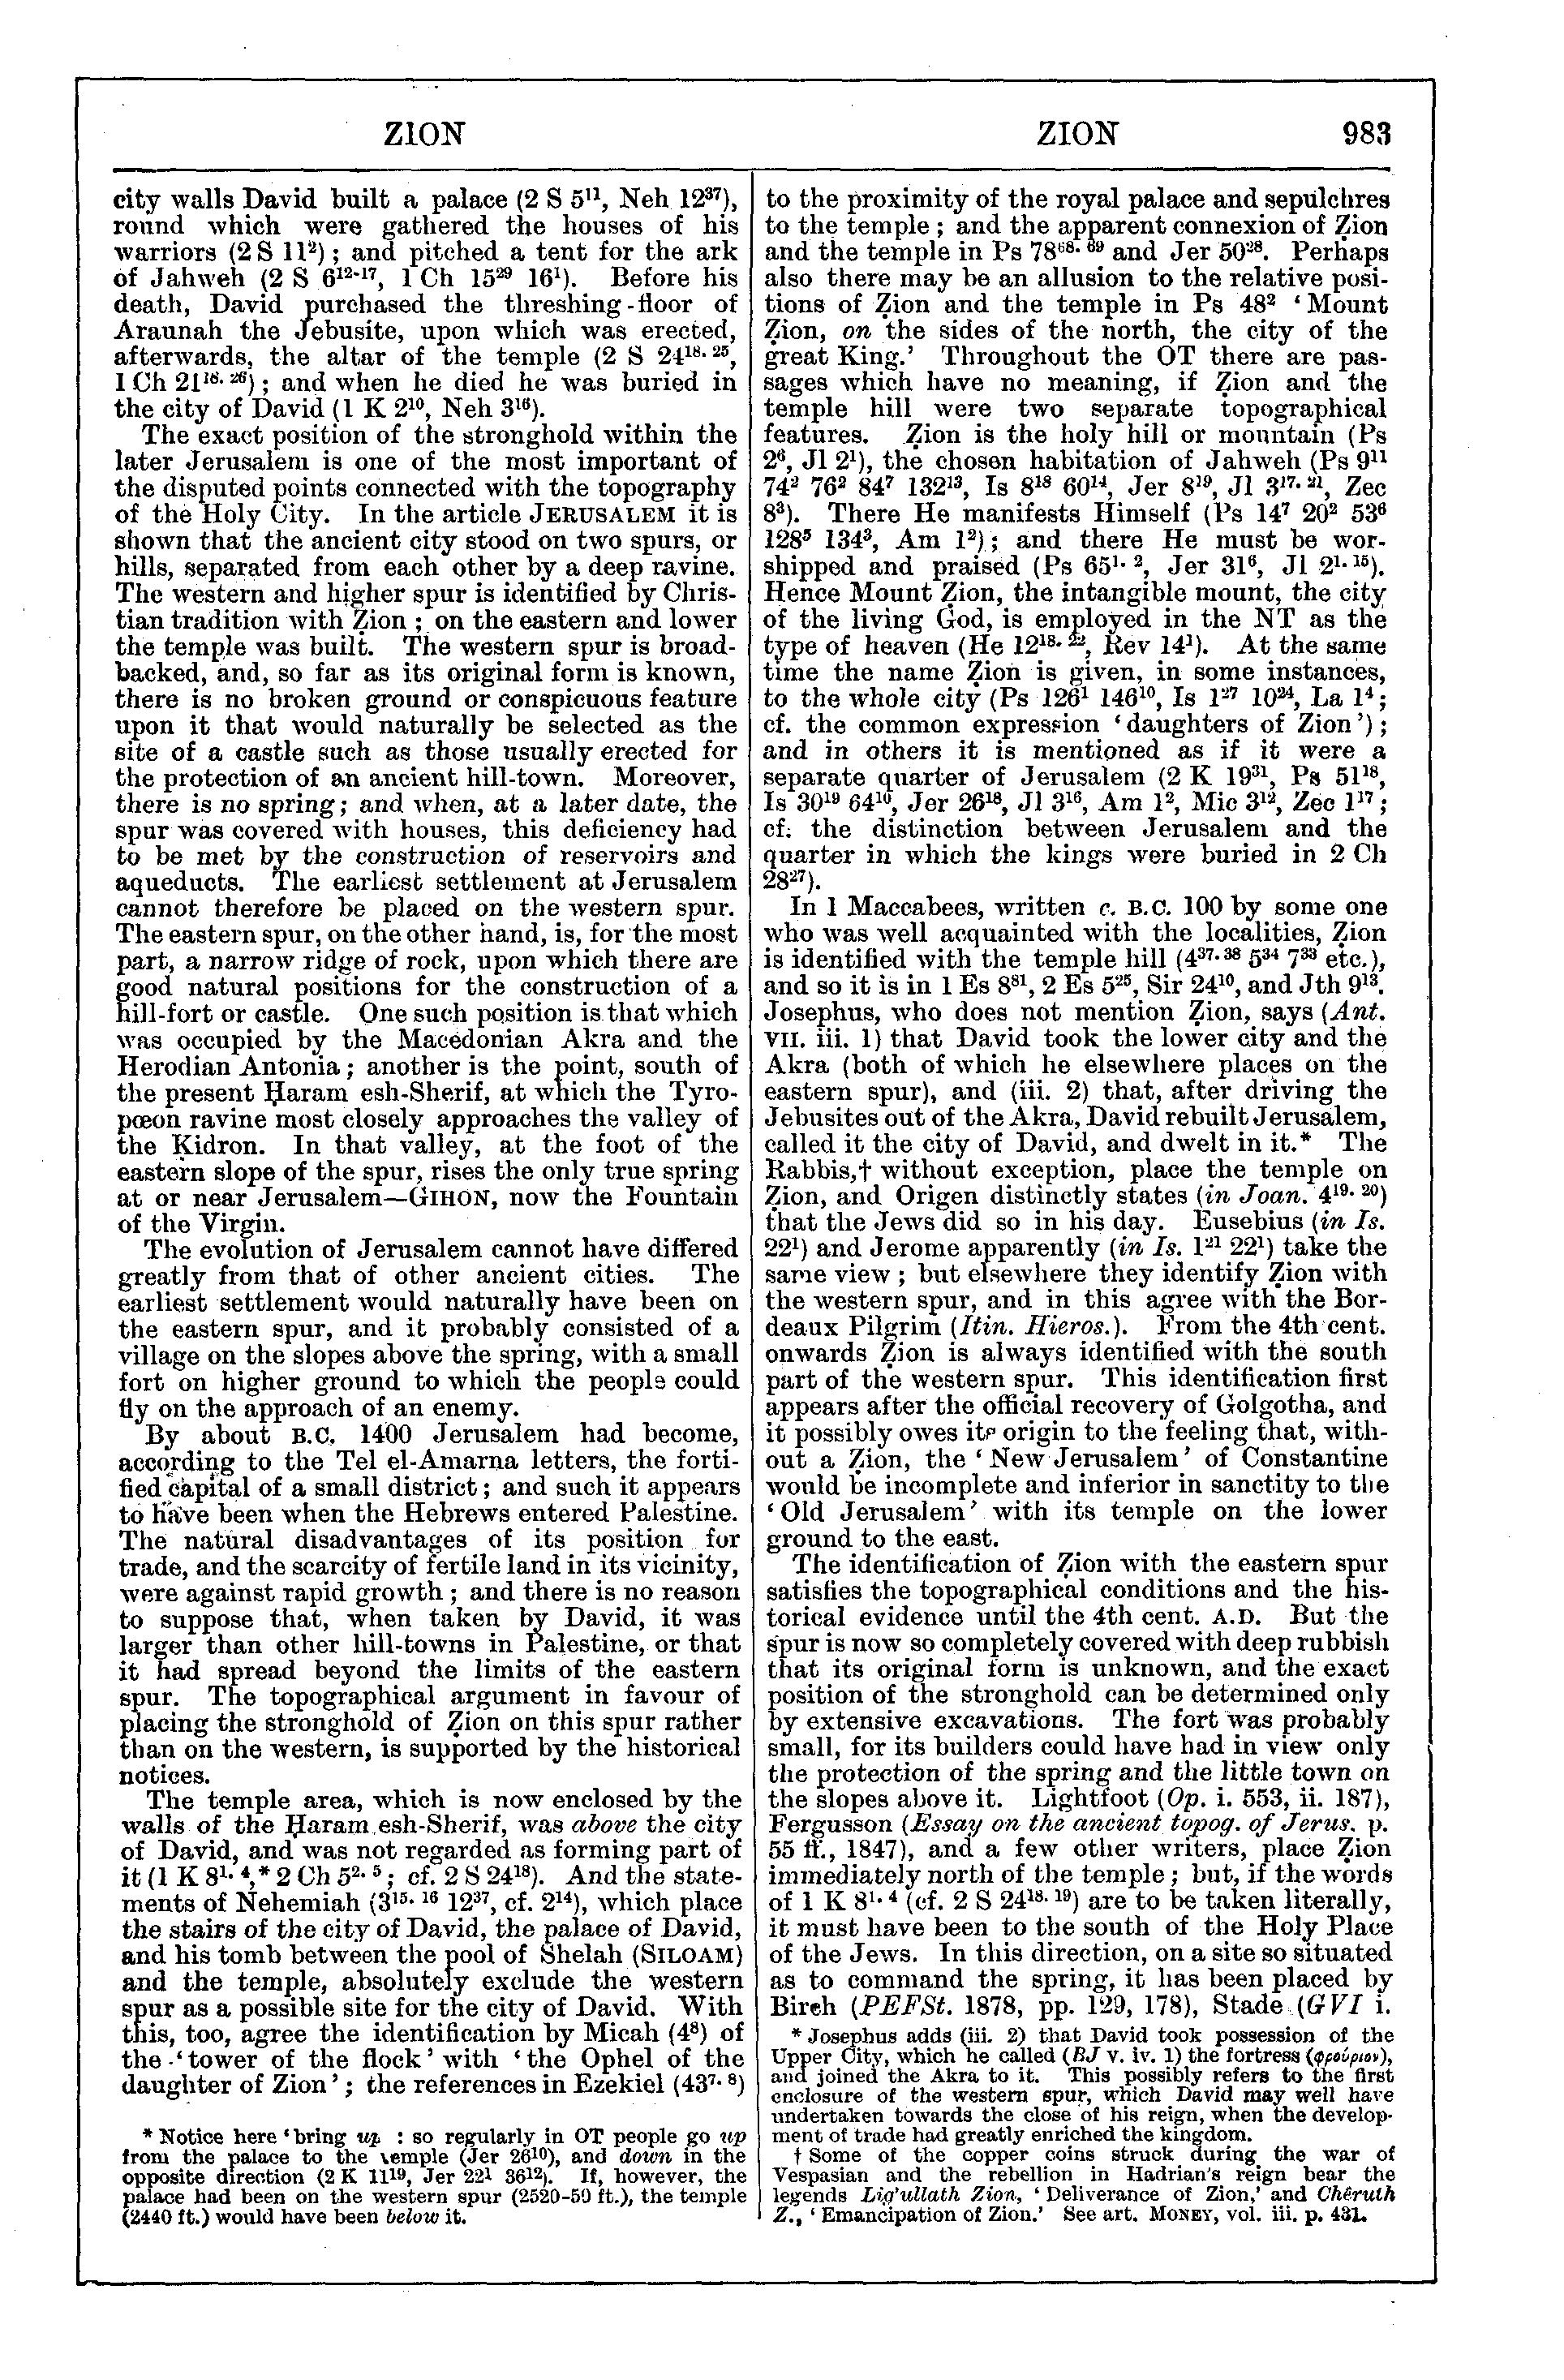 Image of page 983